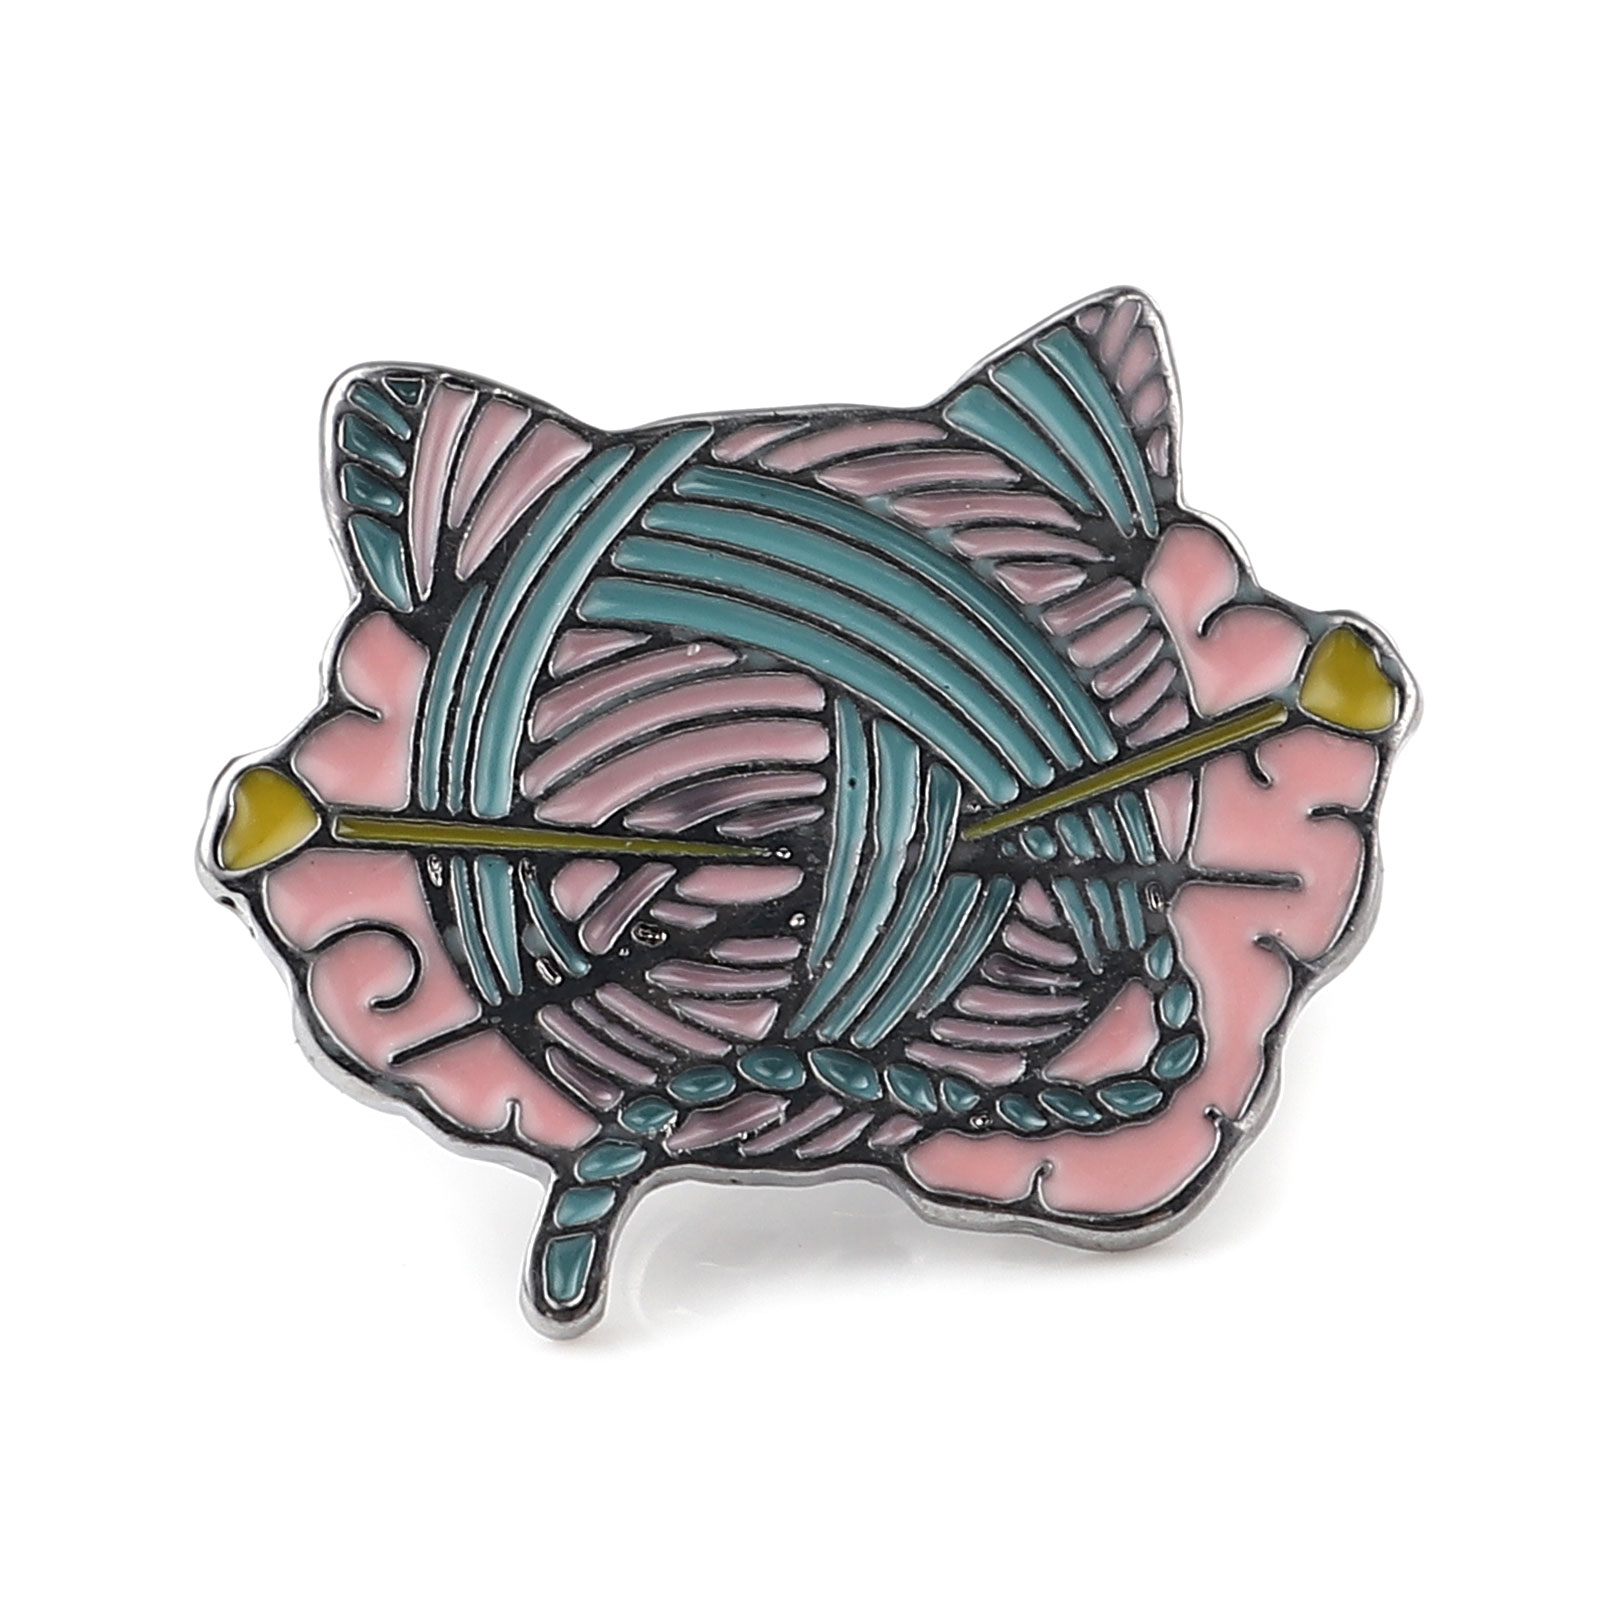 Picture of Pin Brooches Findings Ball of yarn Gunmetal Blue & Pink Enamel 28mm x 23mm, 2 PCs